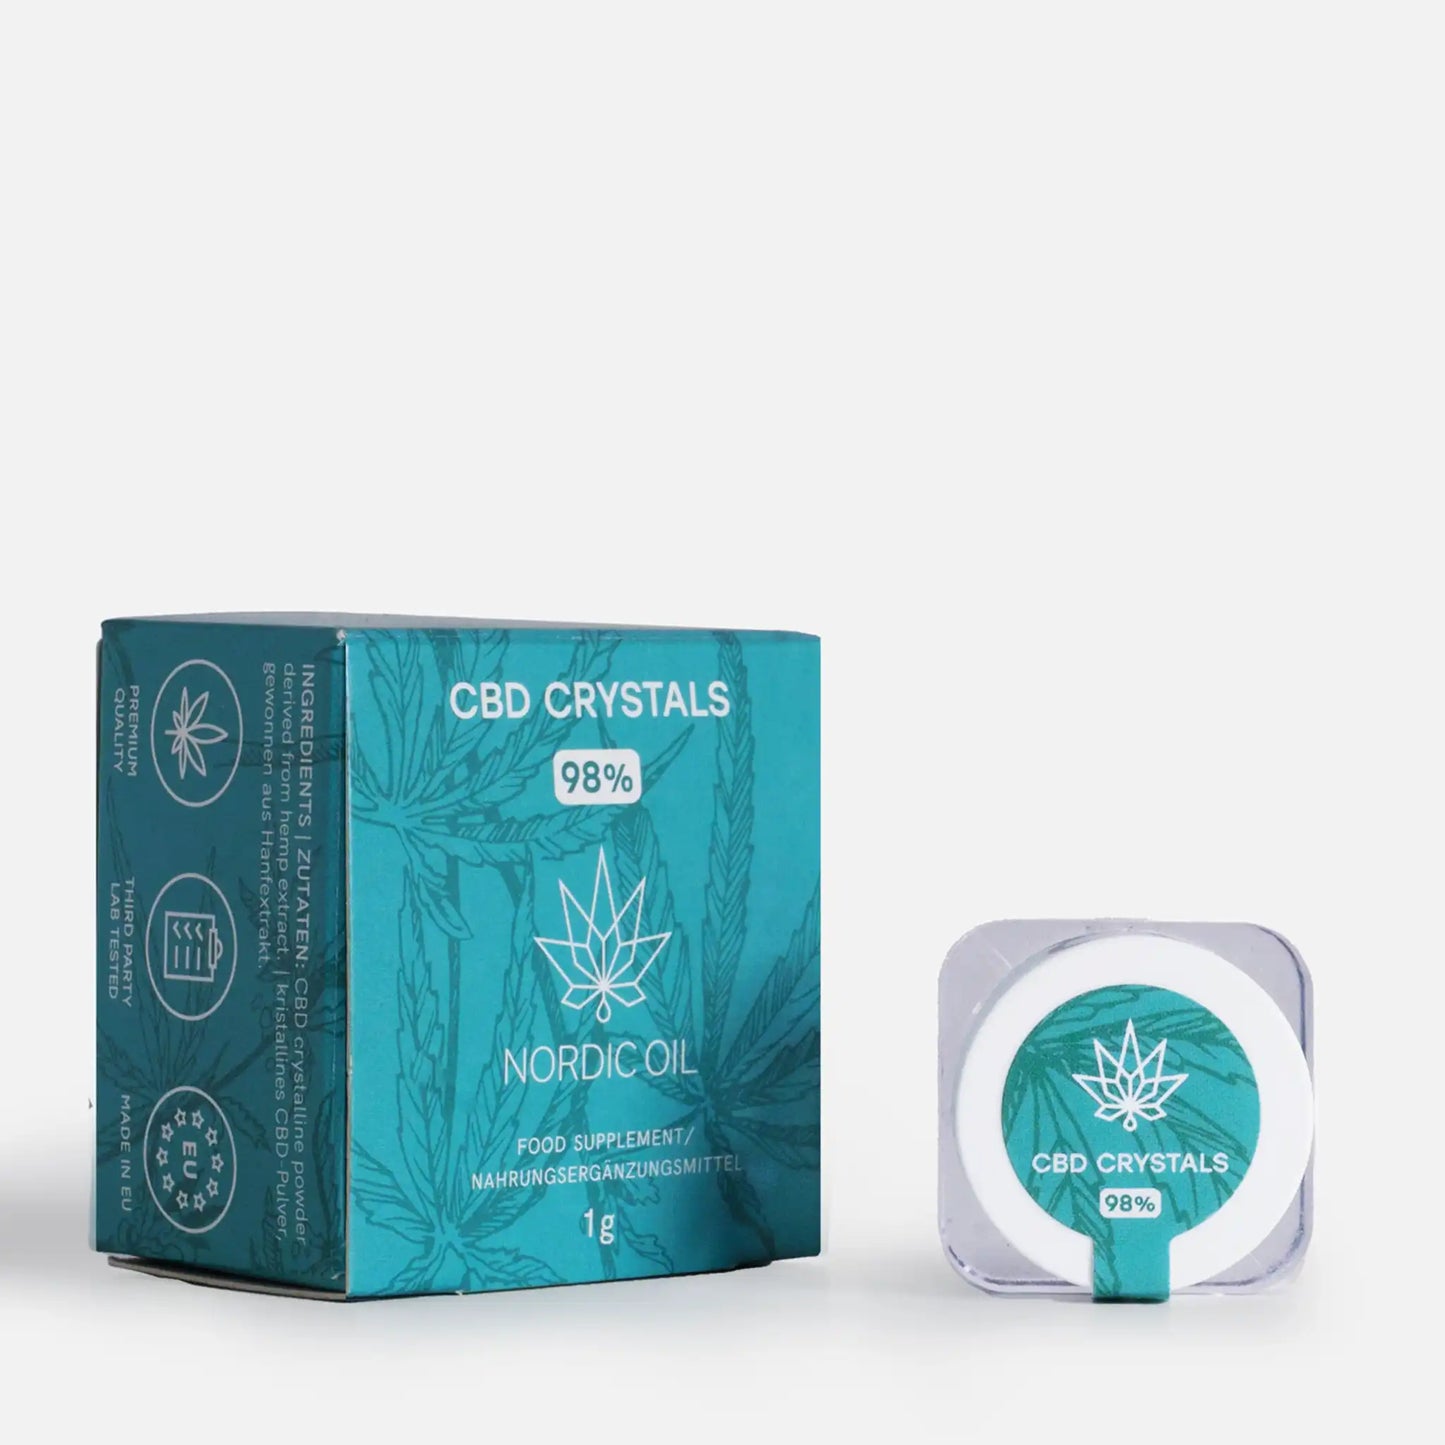 The CBD crystals are next to the packaging